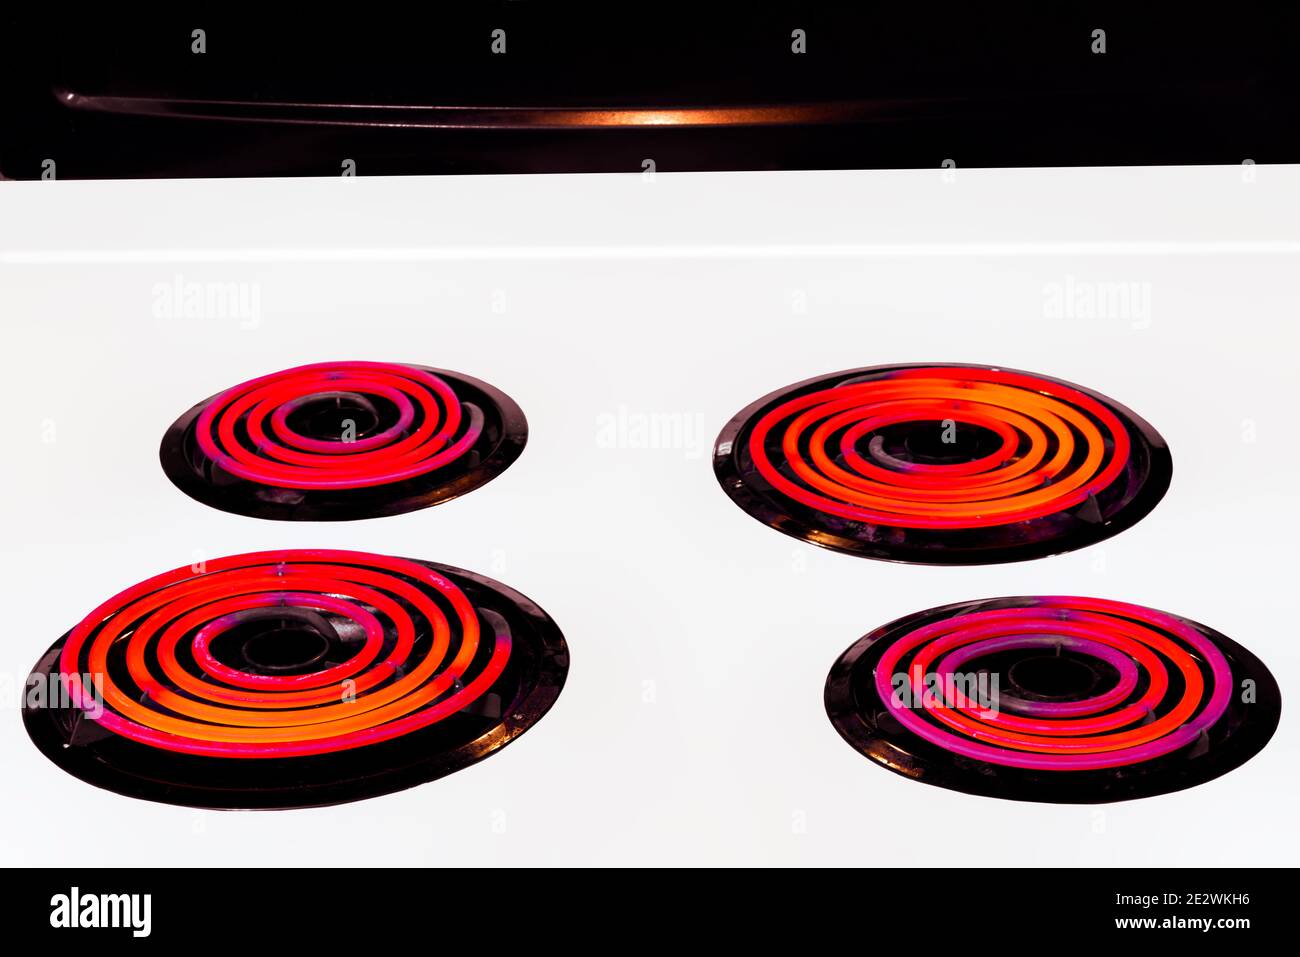 8 Easiest Ways To Clean Electric Stove Burners